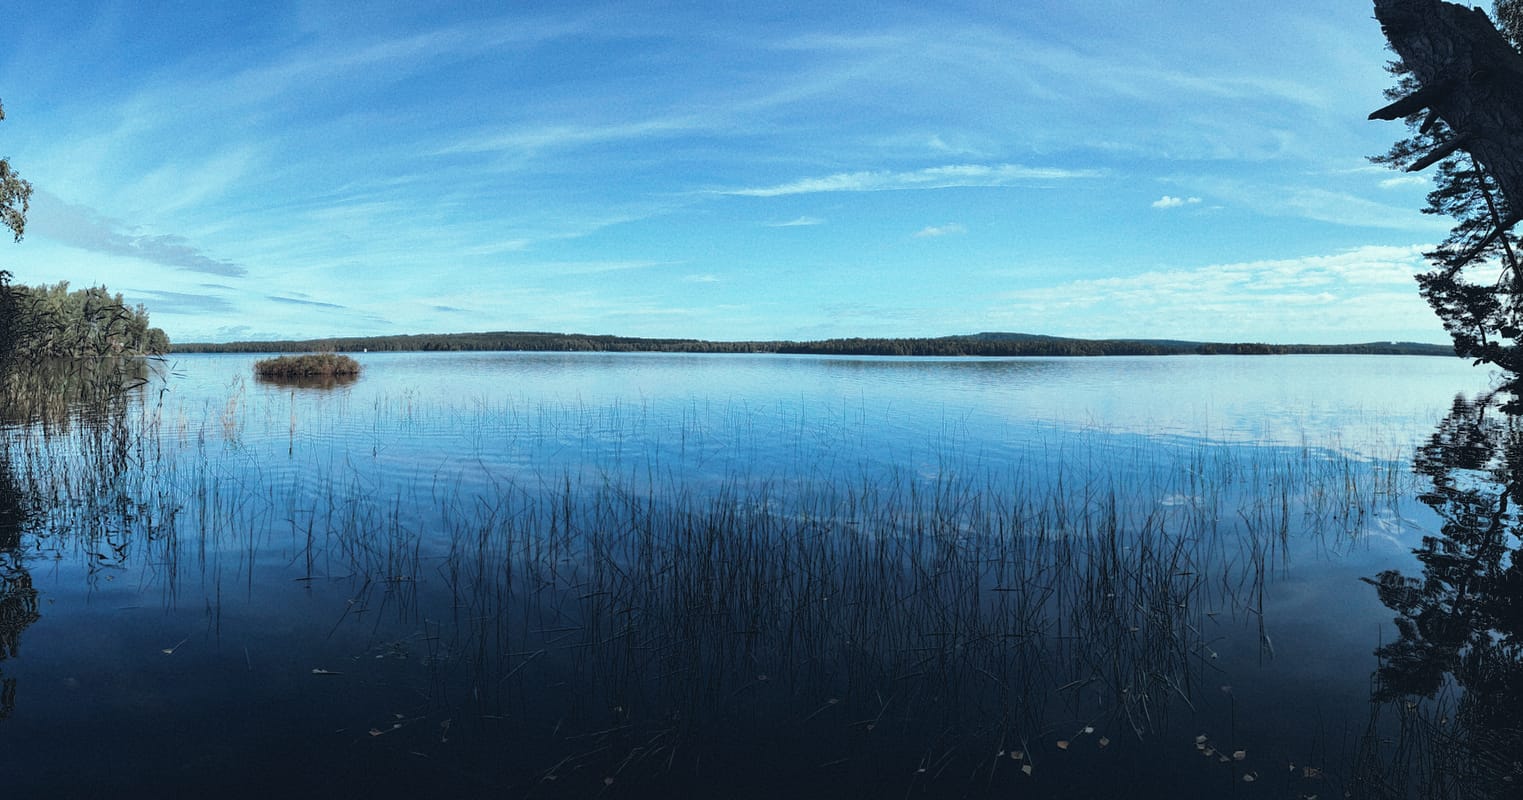 A panoramic view over a lake on a calm day with a blue sky and light cloud veils. Reeds are in the foreground, and on the other side, a forest can be glimpsed.